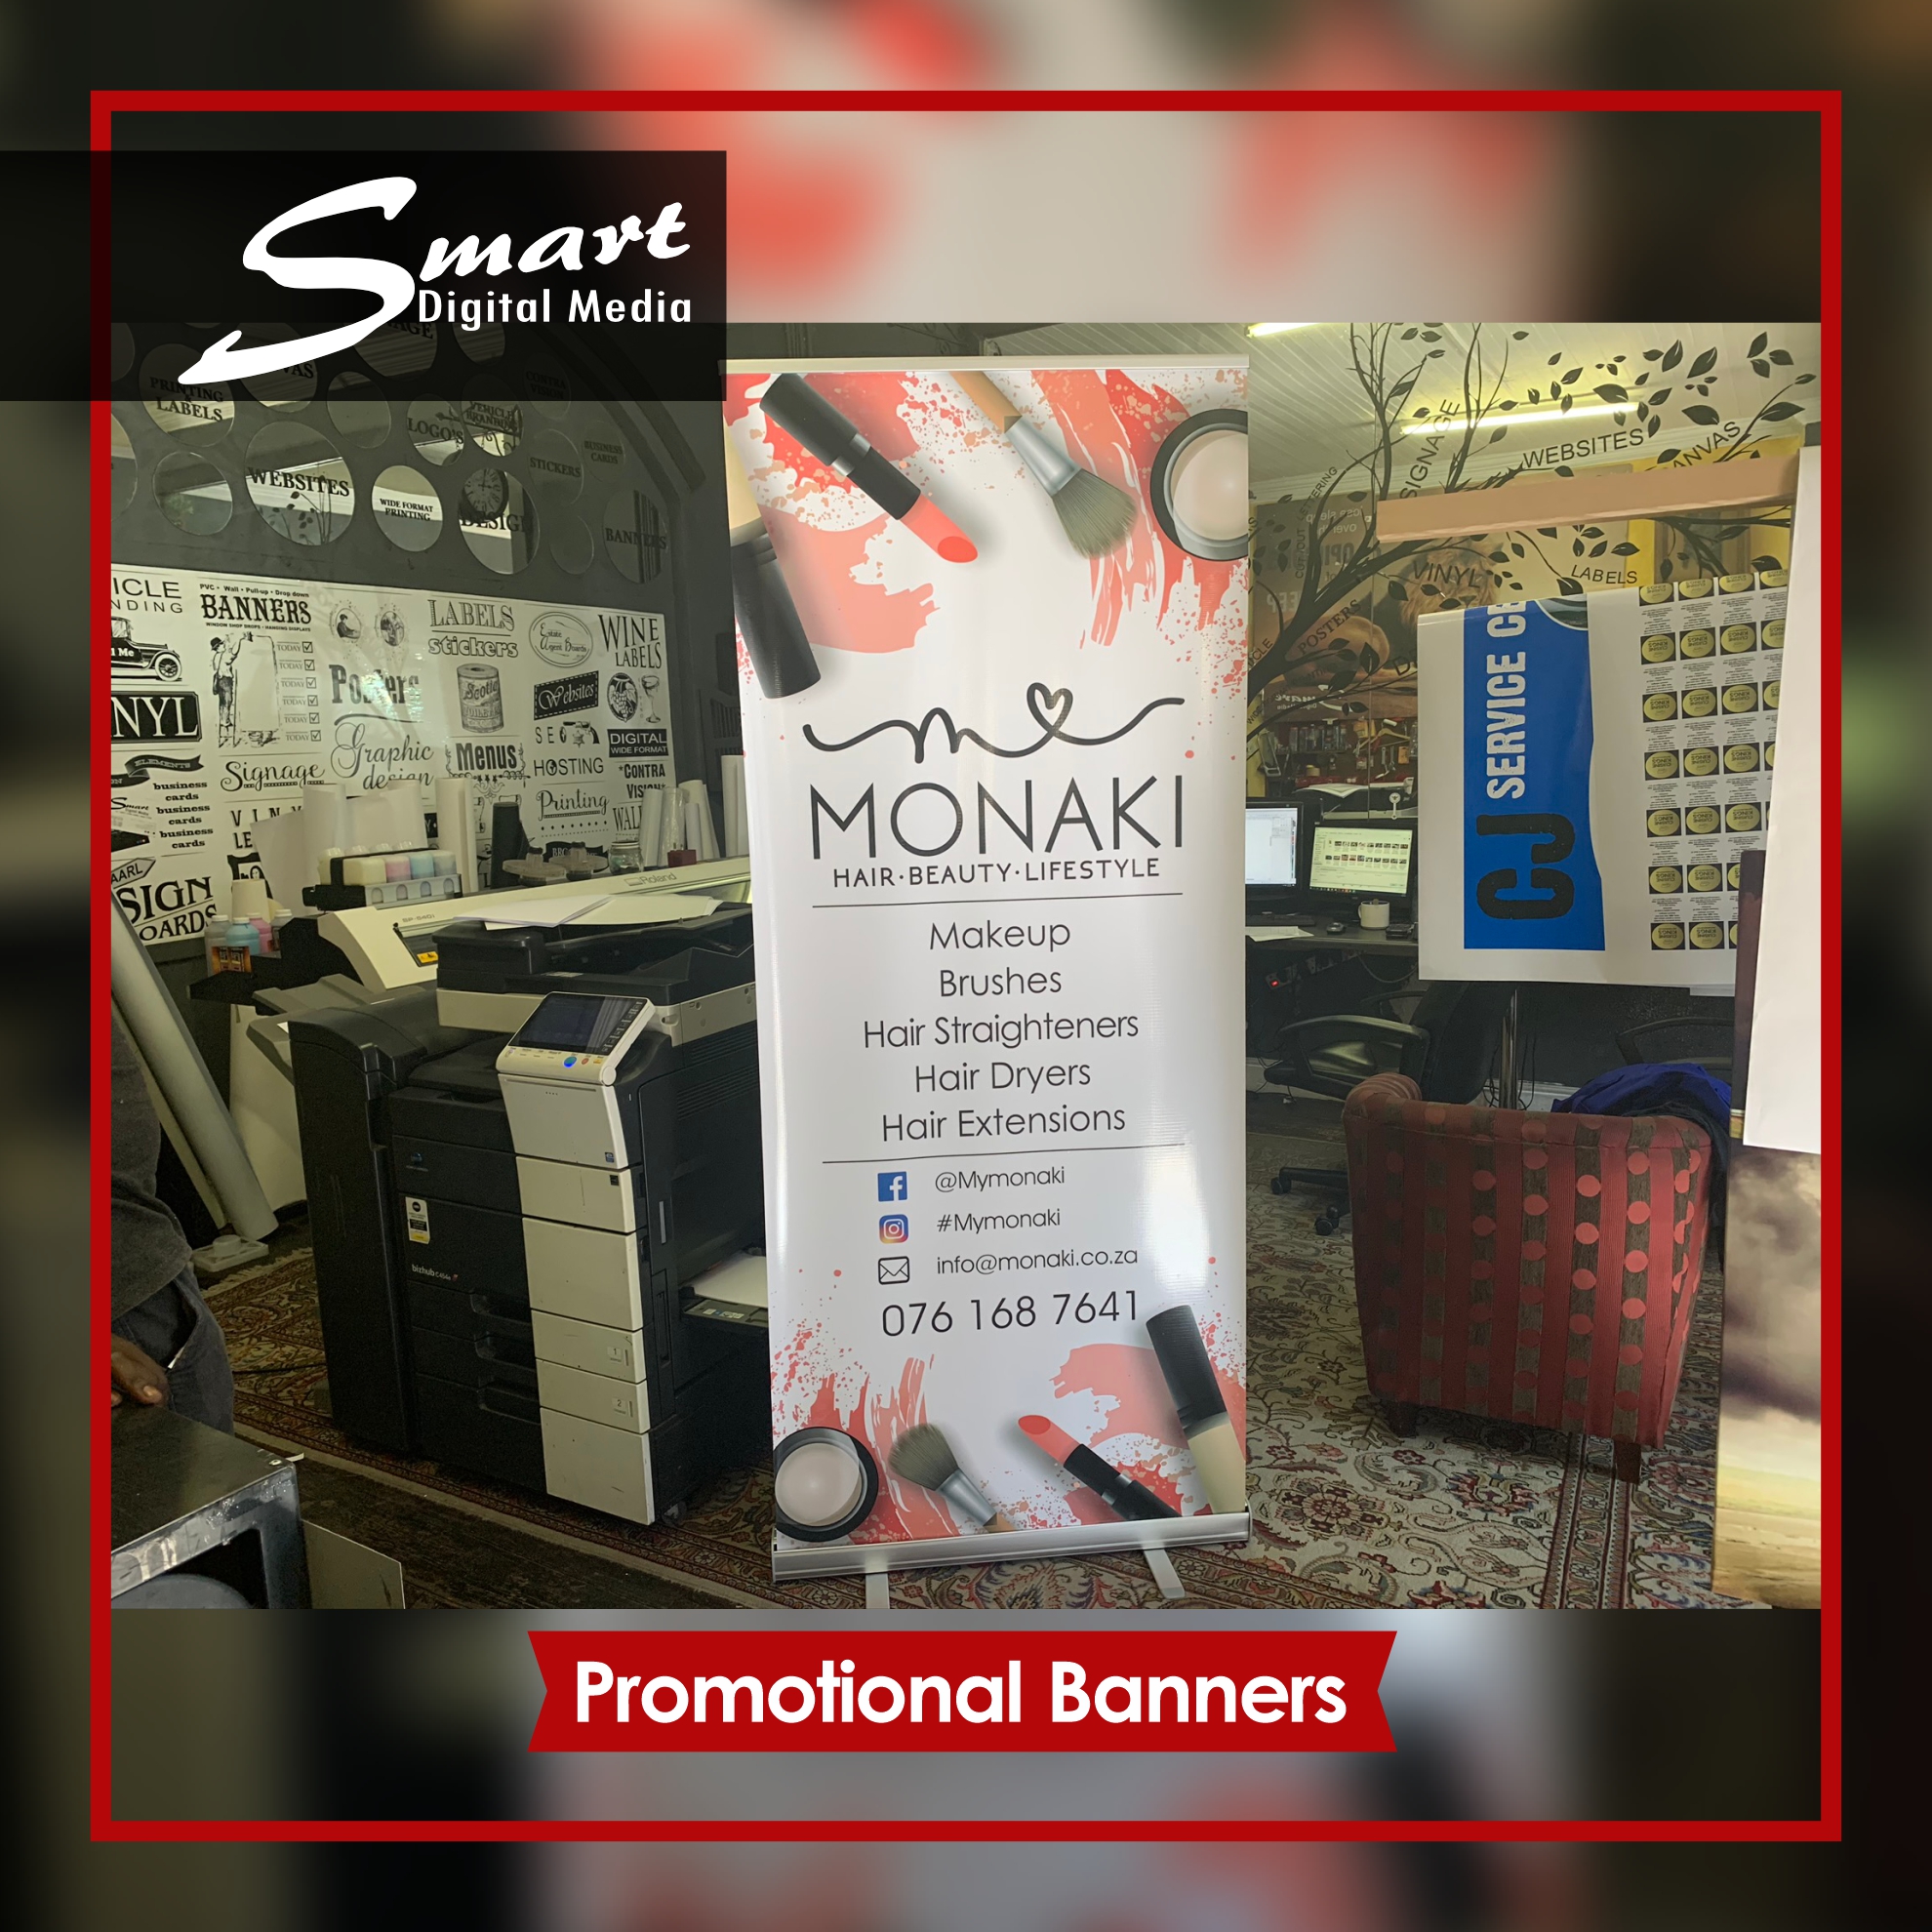 Pull up banner with MONAKI company details.